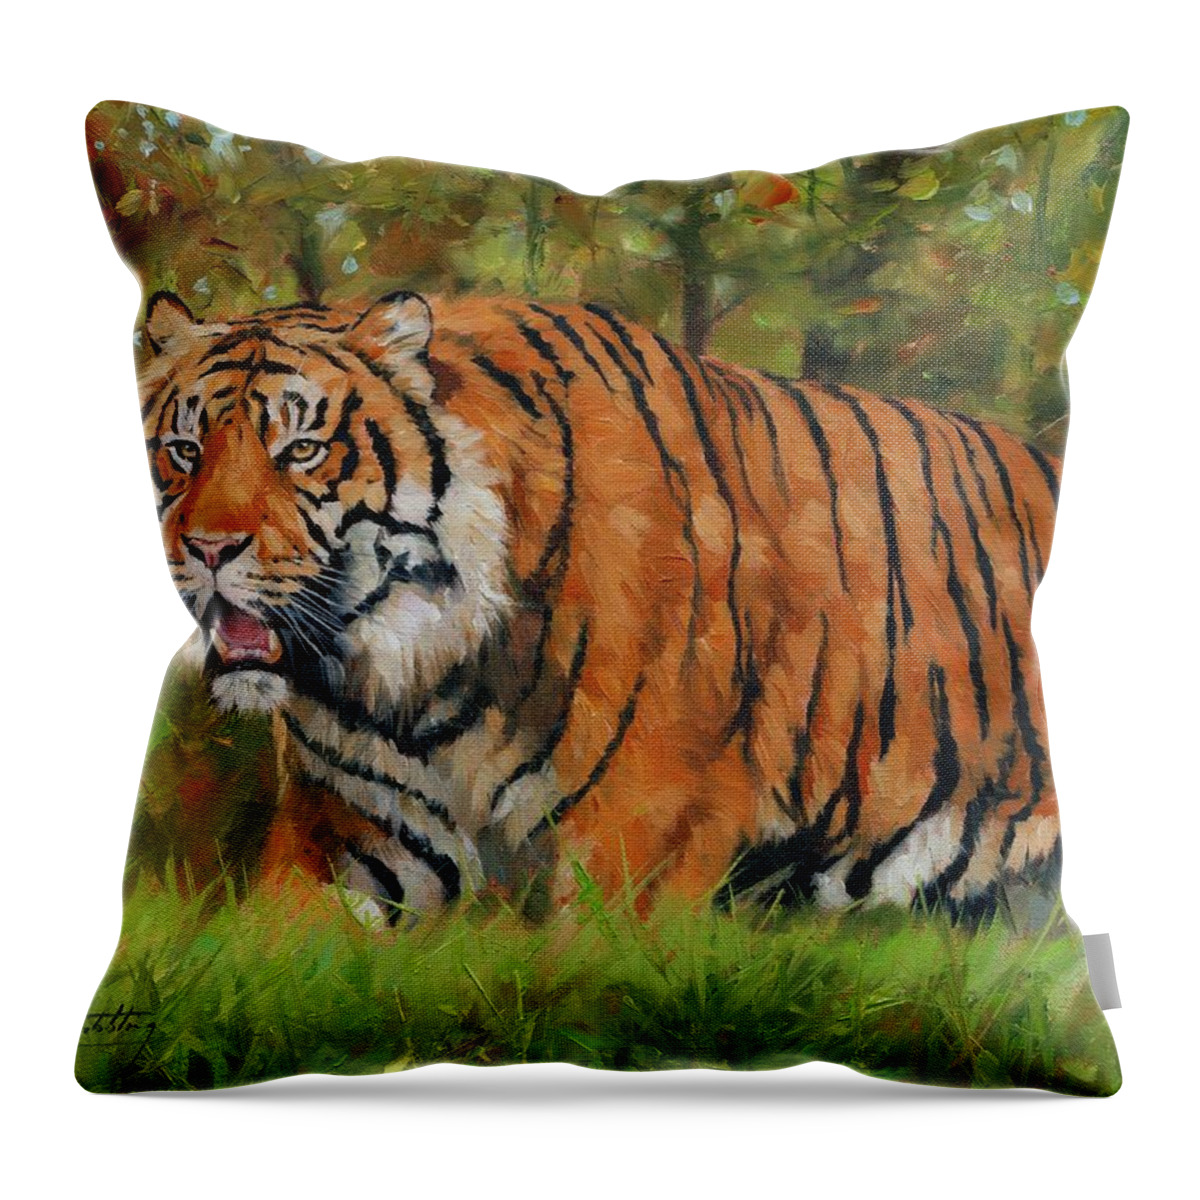 Tiger Throw Pillow featuring the painting Walk in the Forest. Amur Tiger by David Stribbling